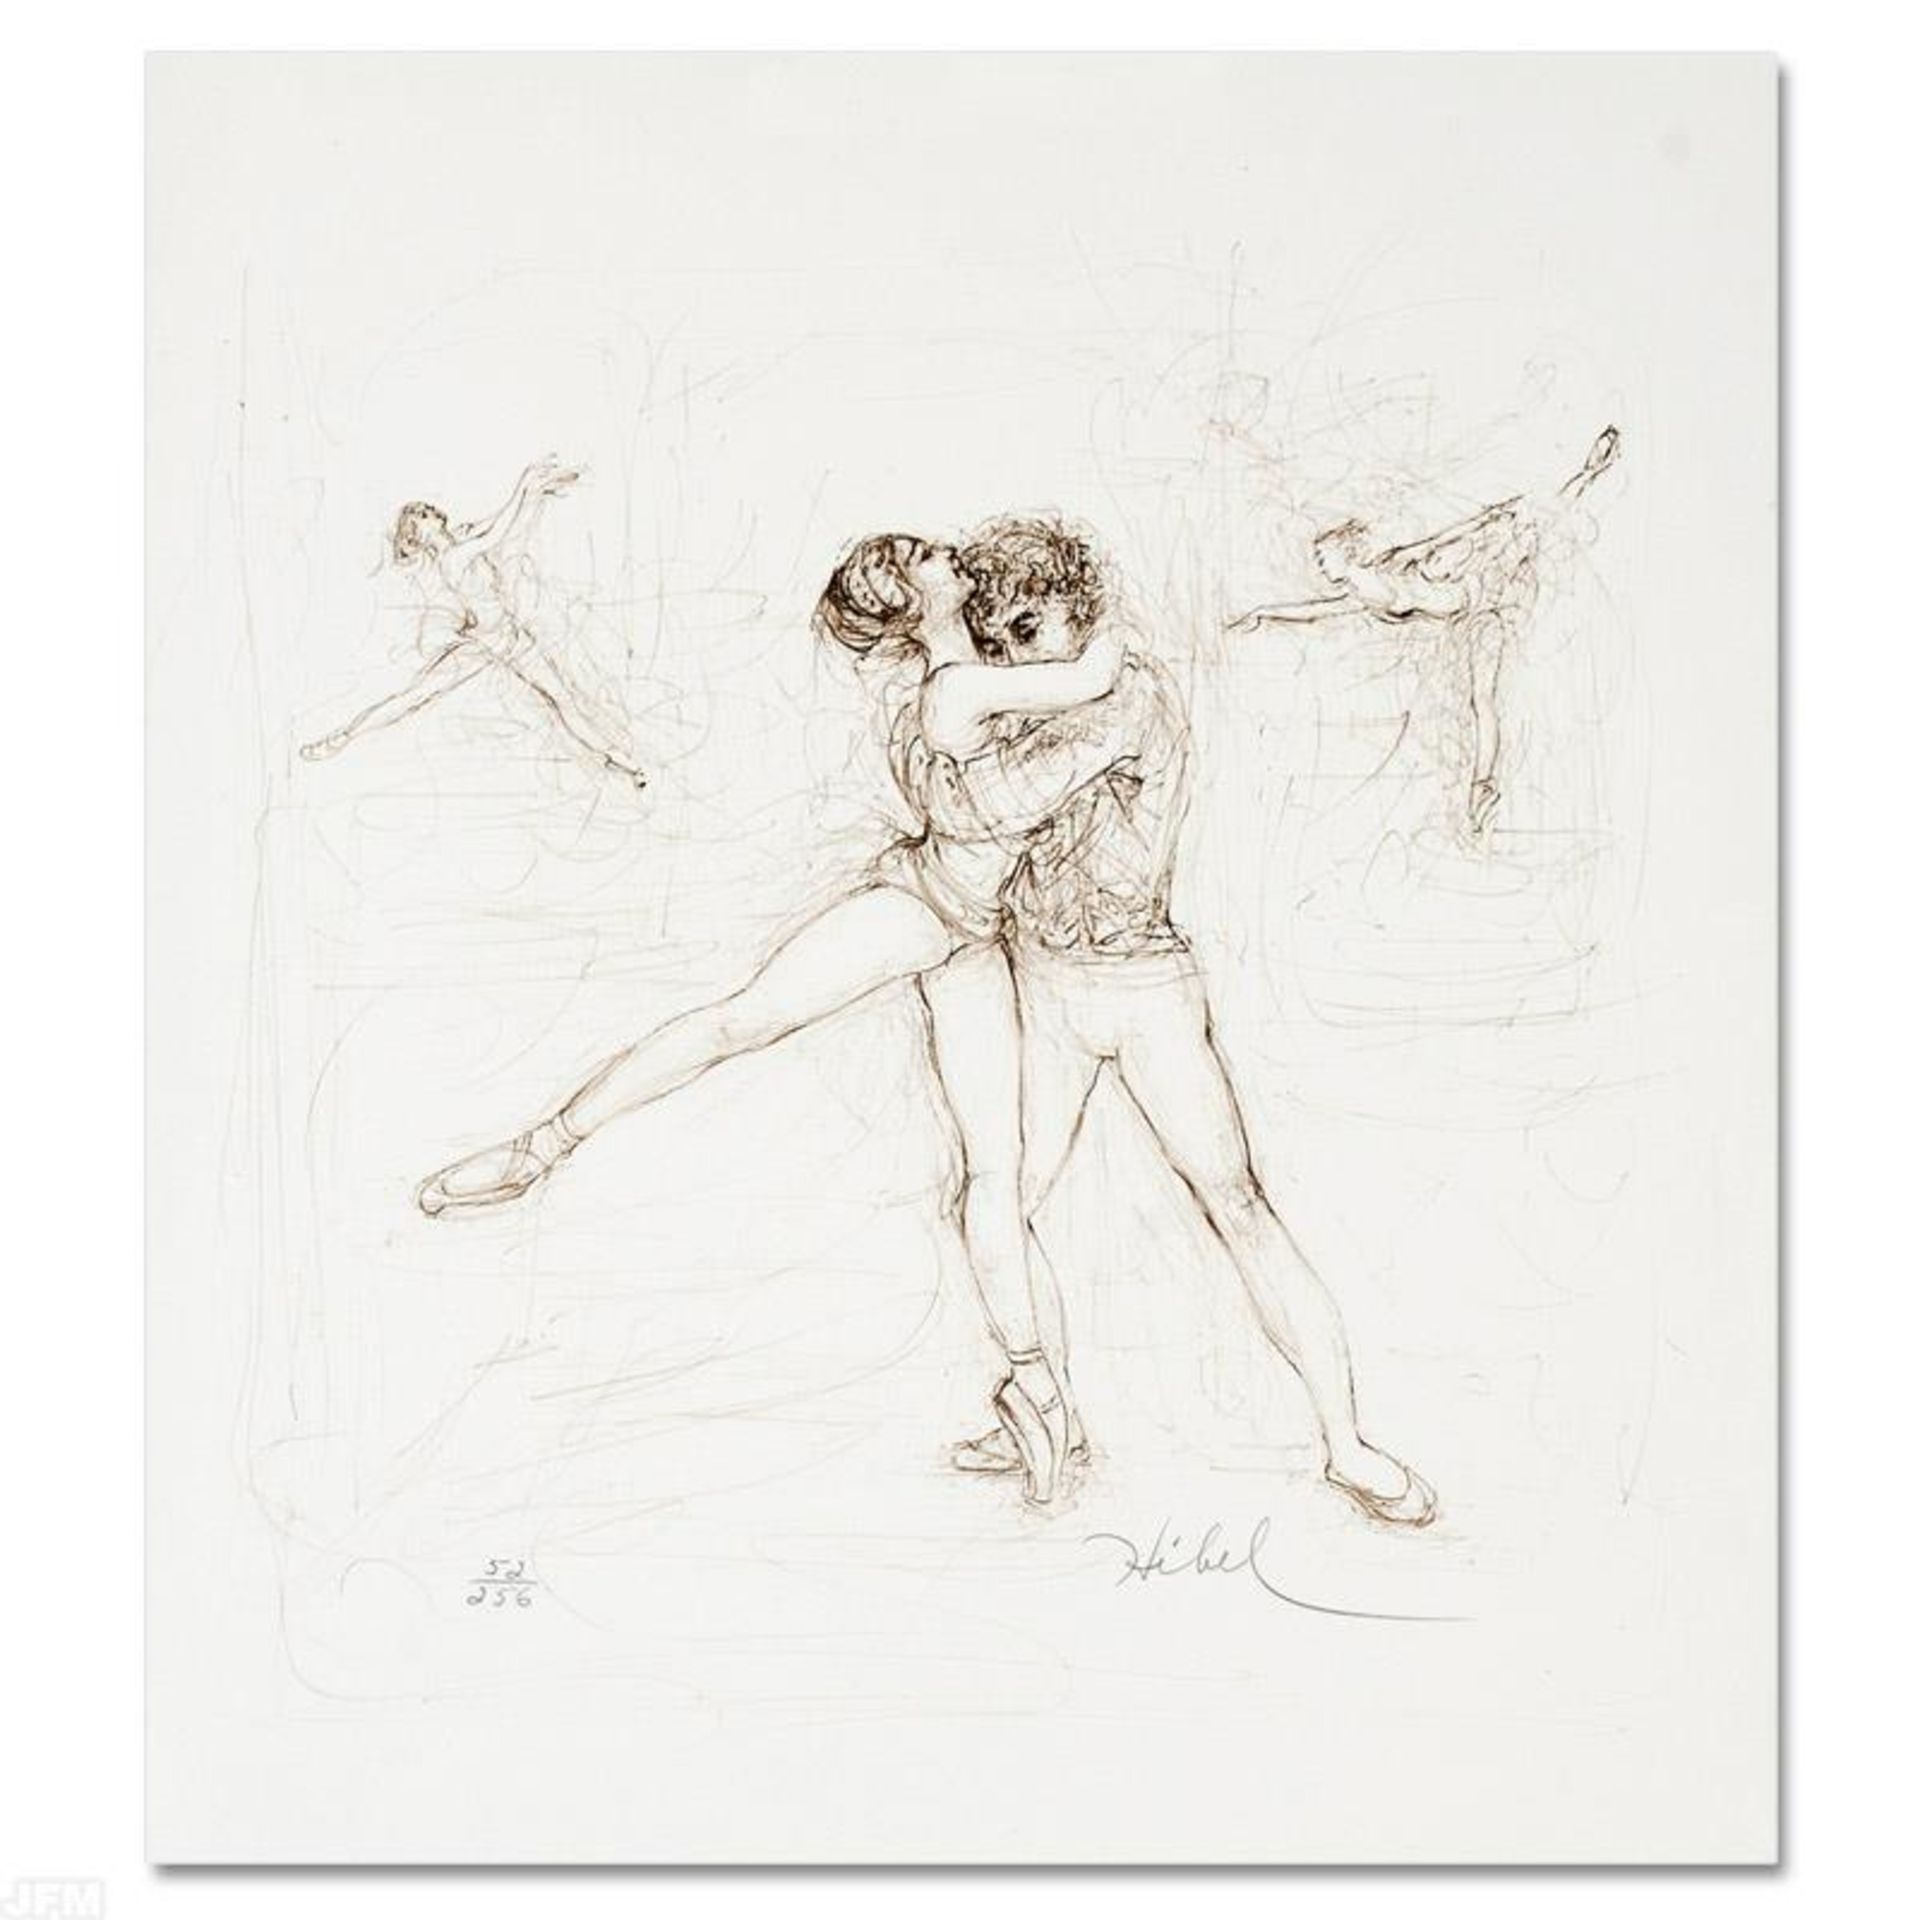 "Pas de Deux" Limited Edition Lithograph by Edna Hibel (1917-2014), Numbered and